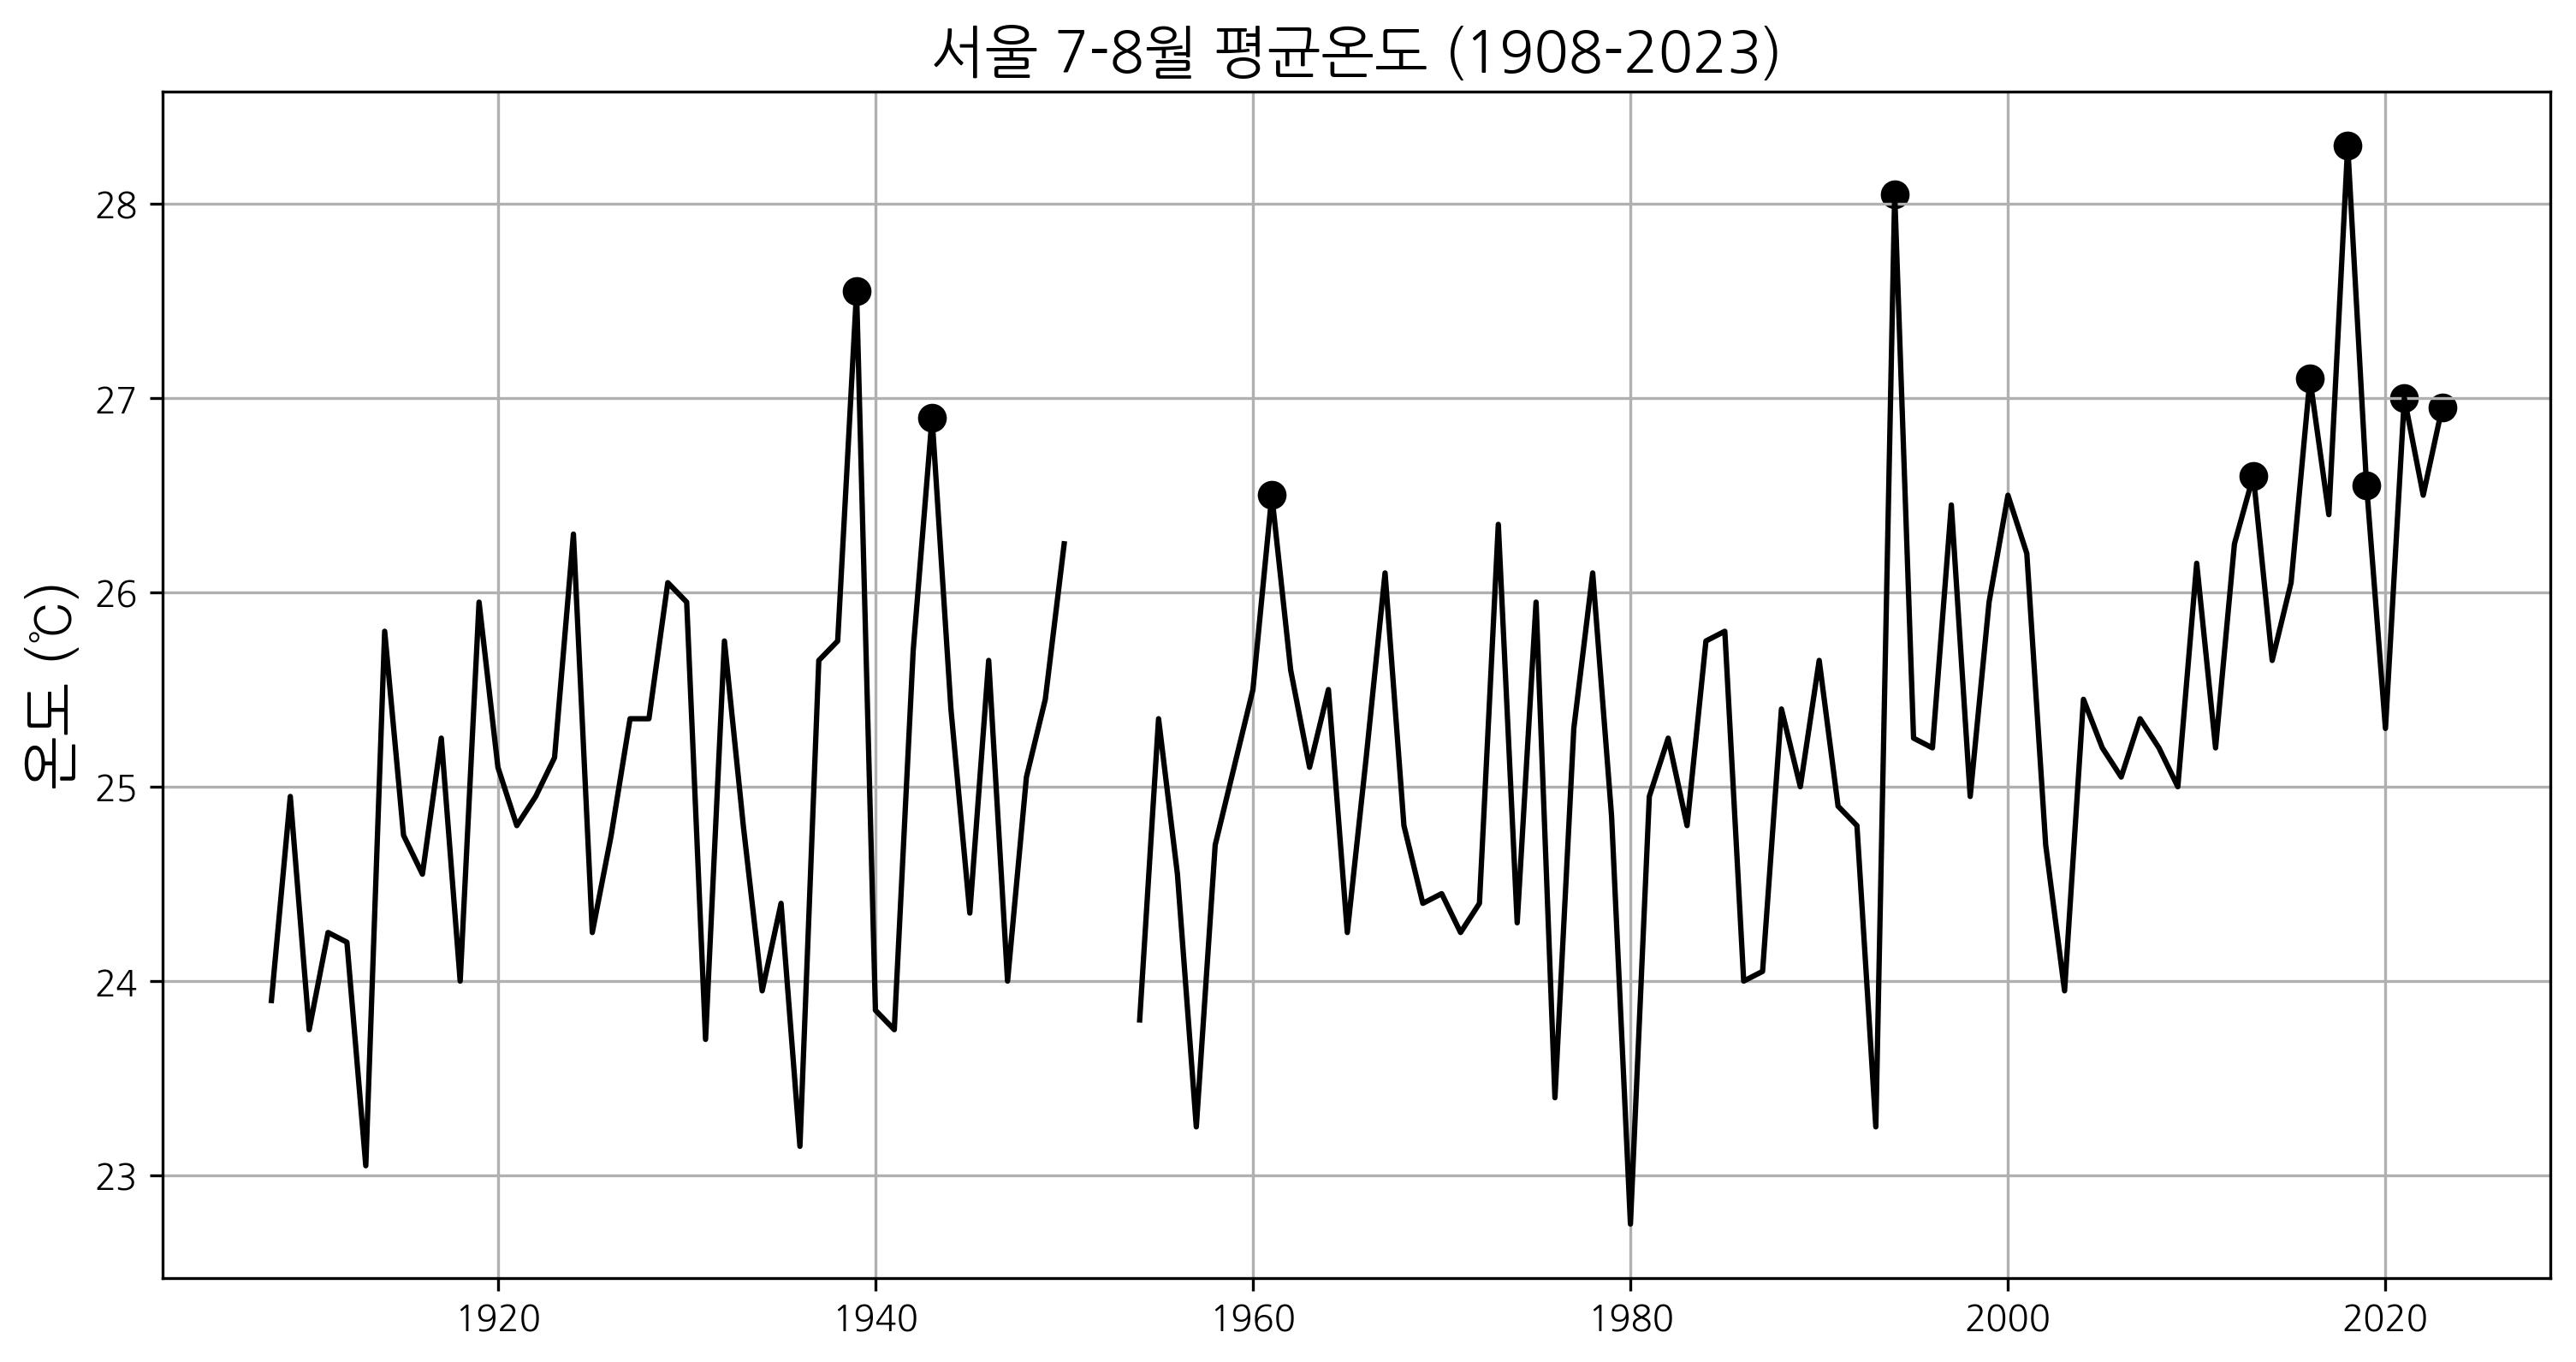 “The Korean Peninsula is facing routine heat waves, and greenhouse gases must be reduced.” Professor Jin-Ho Yoon’s team - USU (Utah State University) 21st century long-term climate analysis 이미지